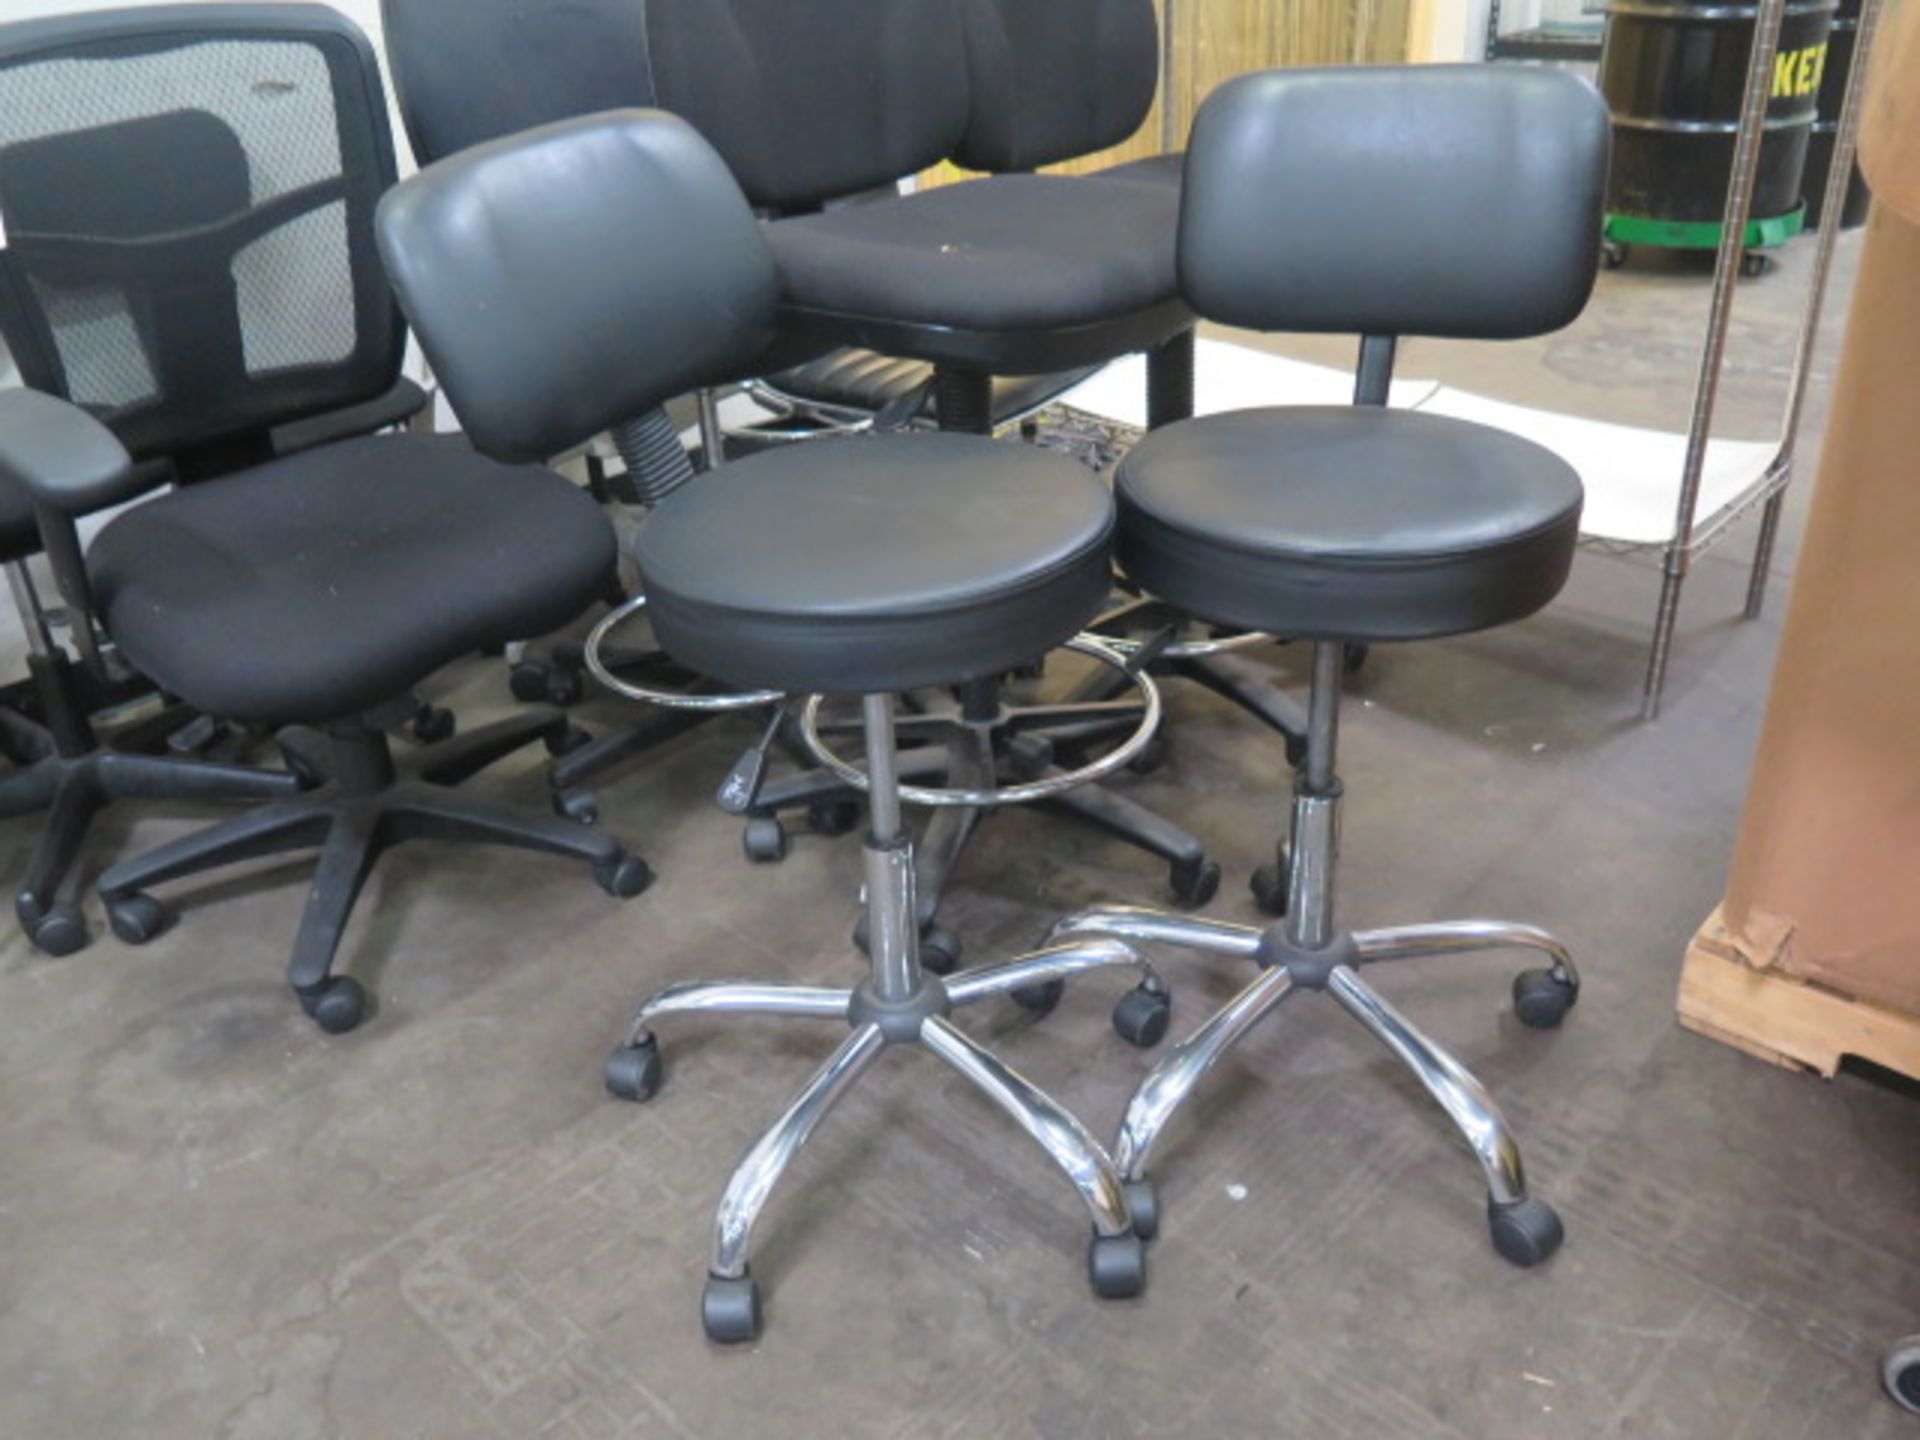 Shop Stools and Office Chairs (SOLD AS-IS - NO WARRANTY) - Image 2 of 3